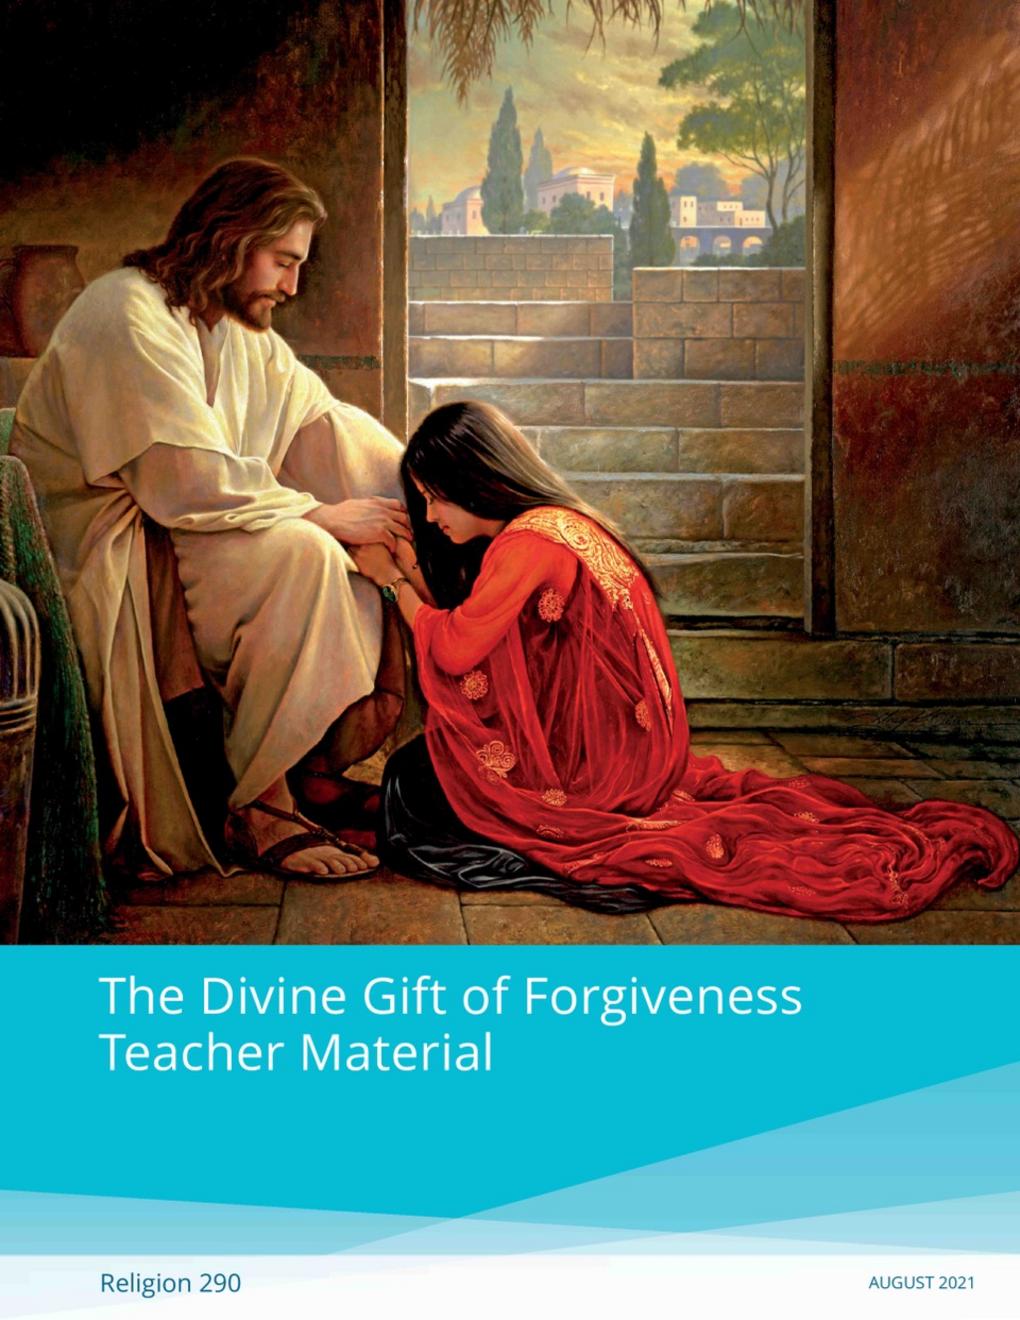 The Divine Gift of Forgiveness Teacher Material (Rel 290)